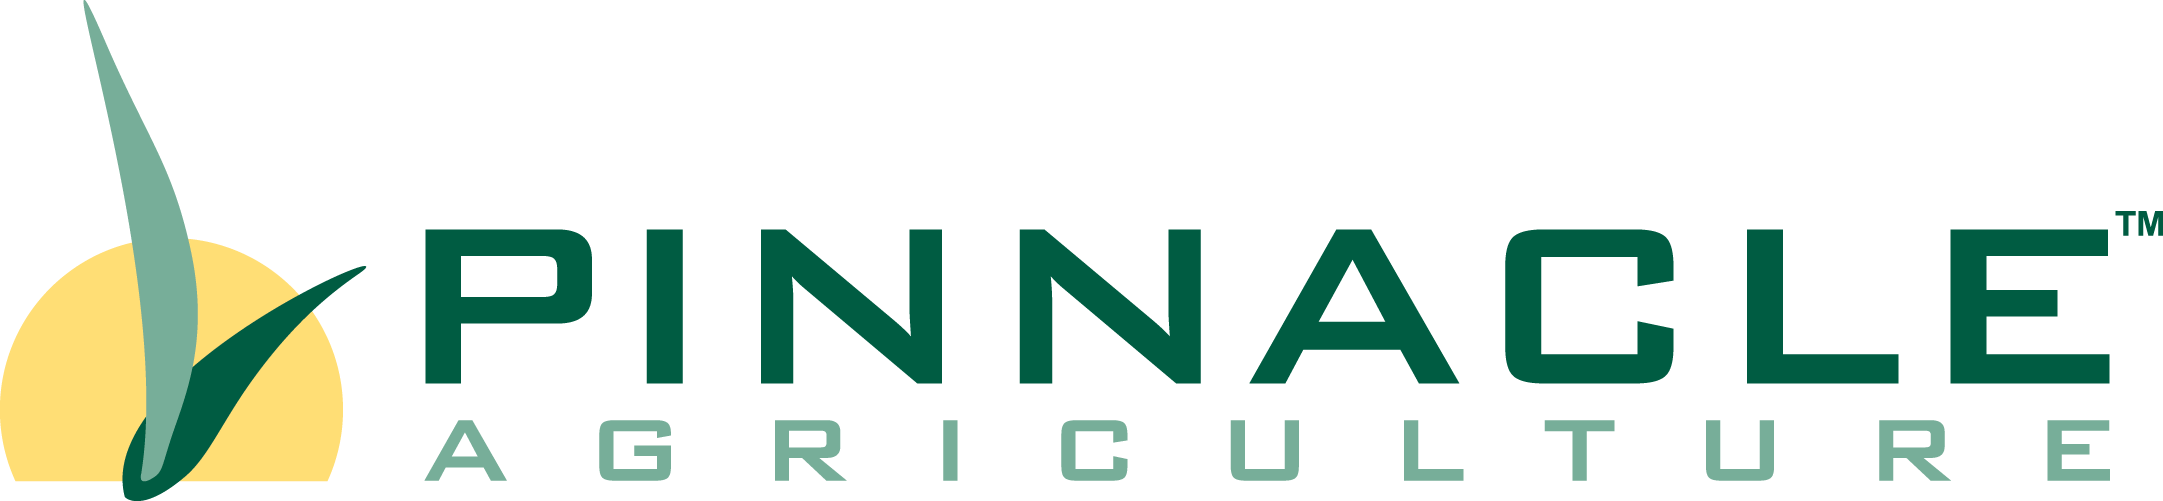 Pinnacle Agriculture